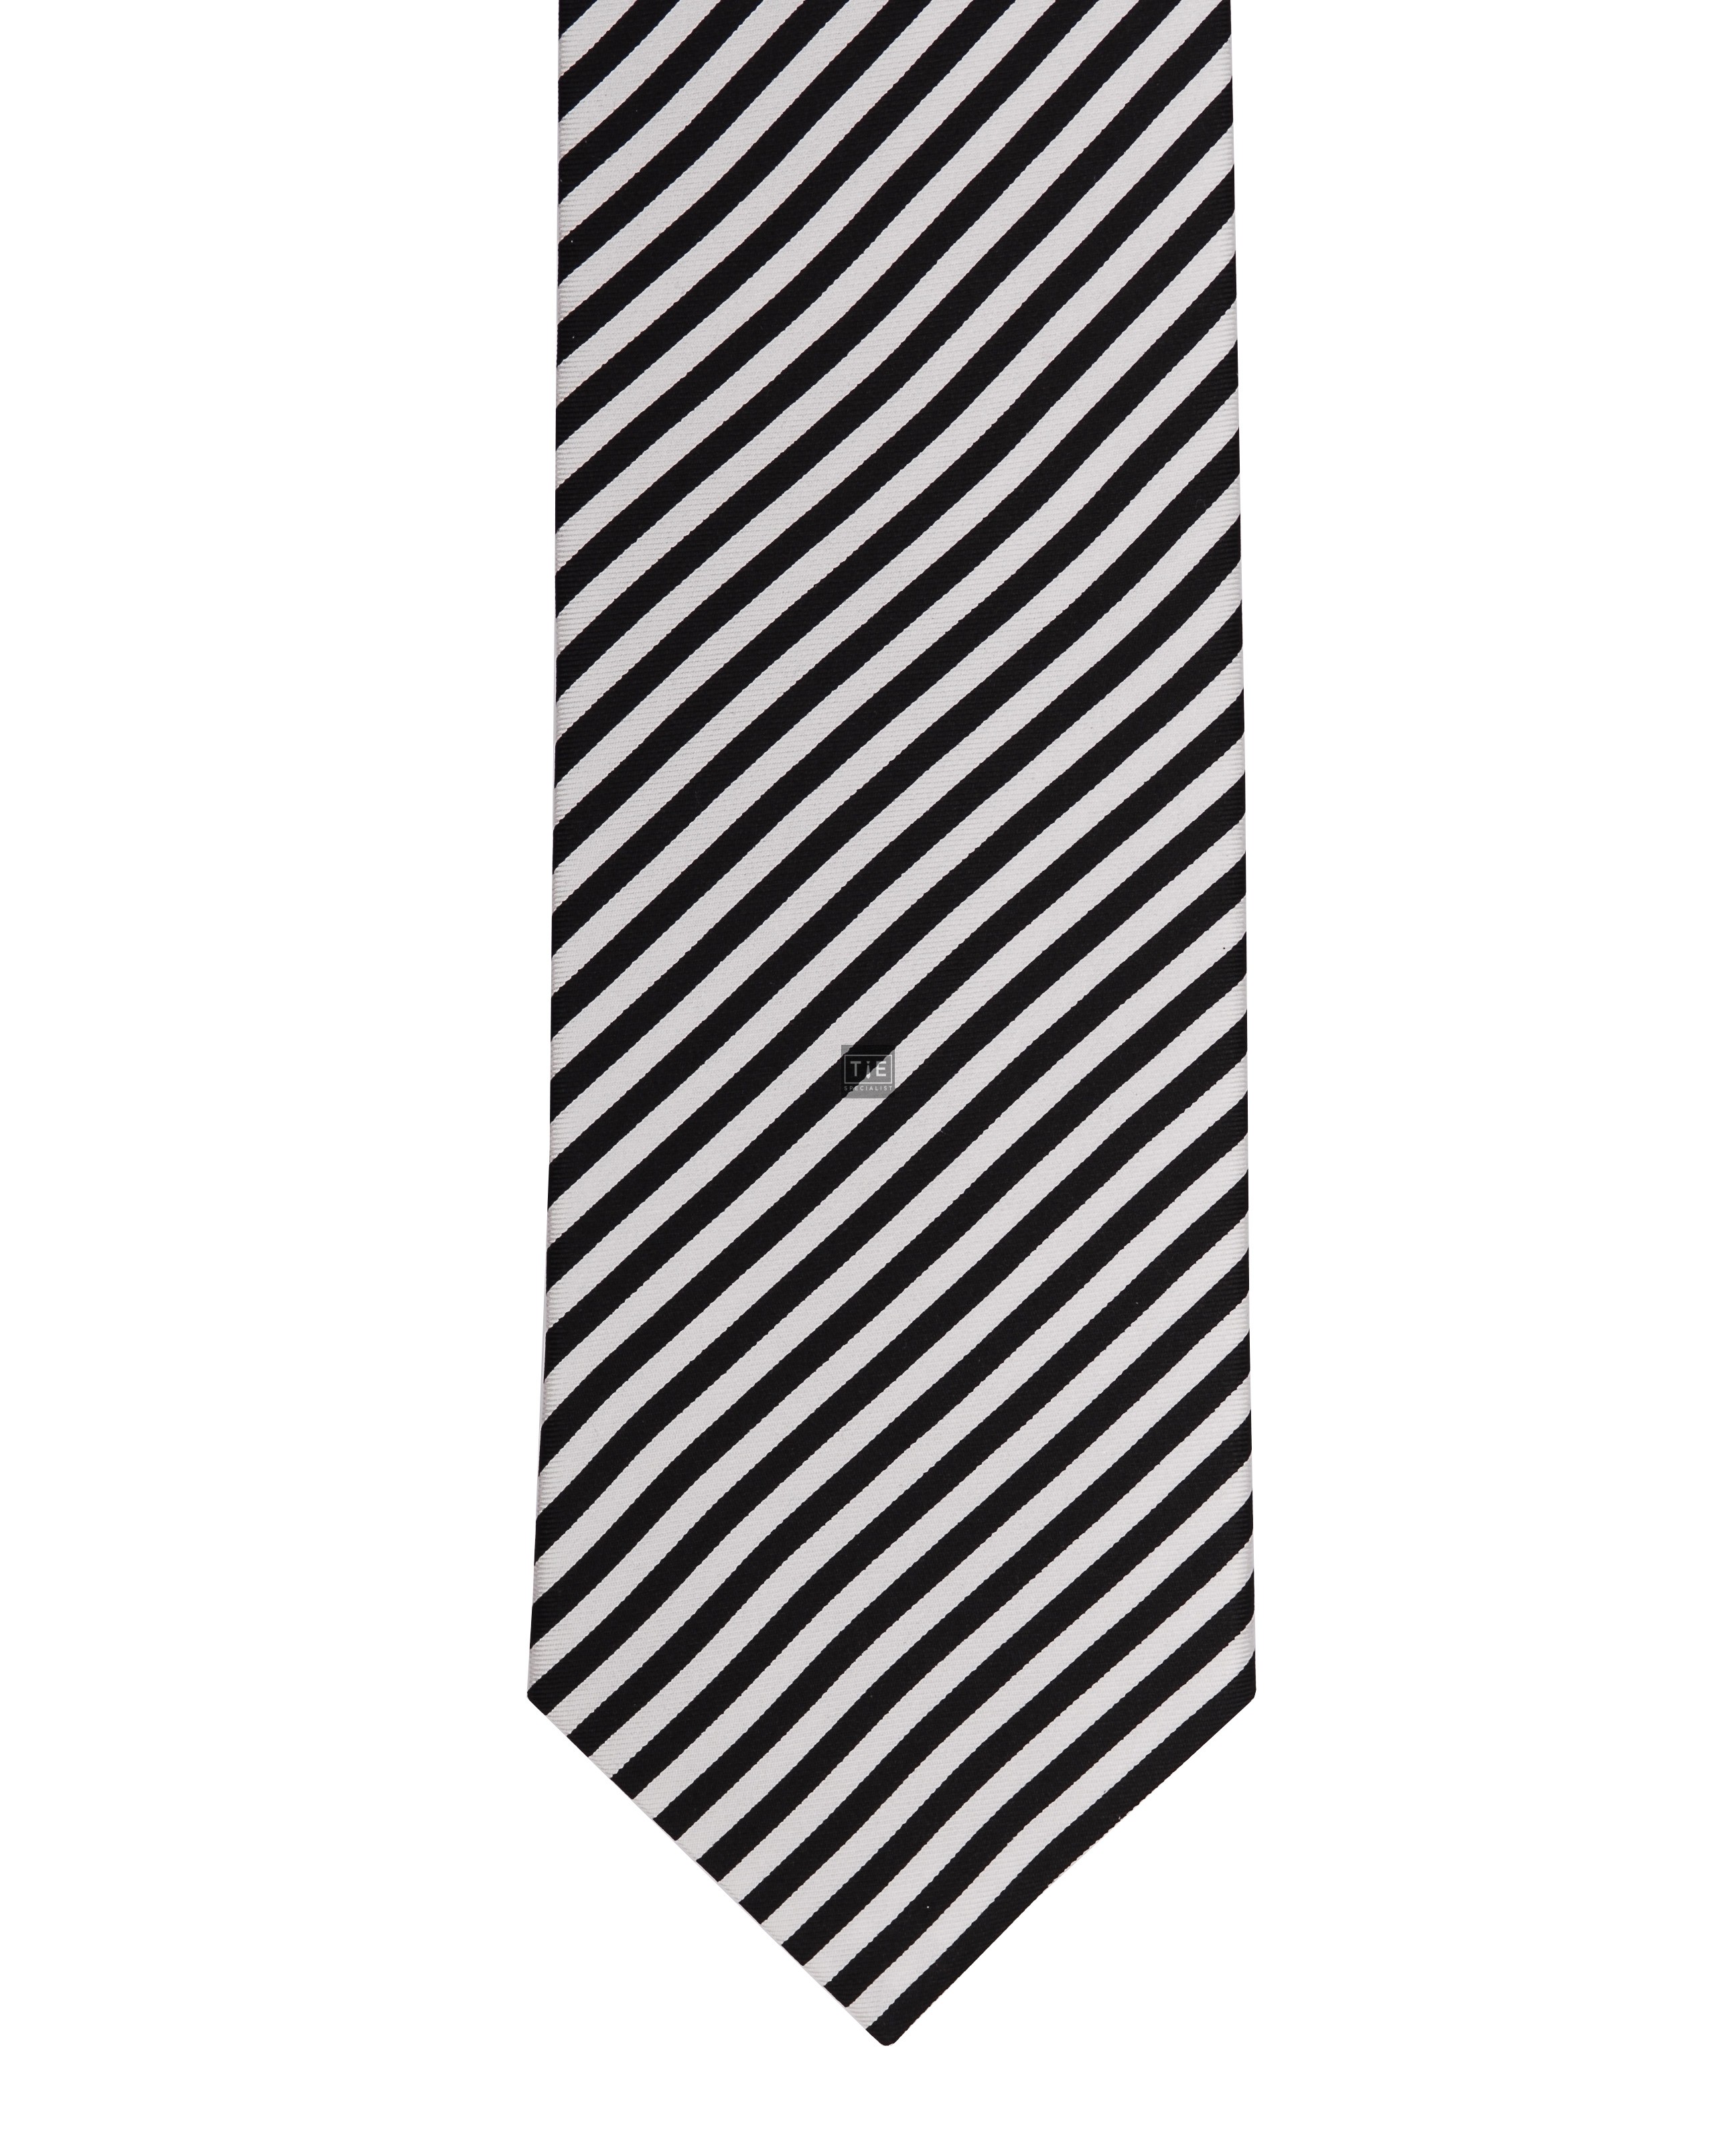 Striped Black and White Silk Tie with Matching Pocket Square